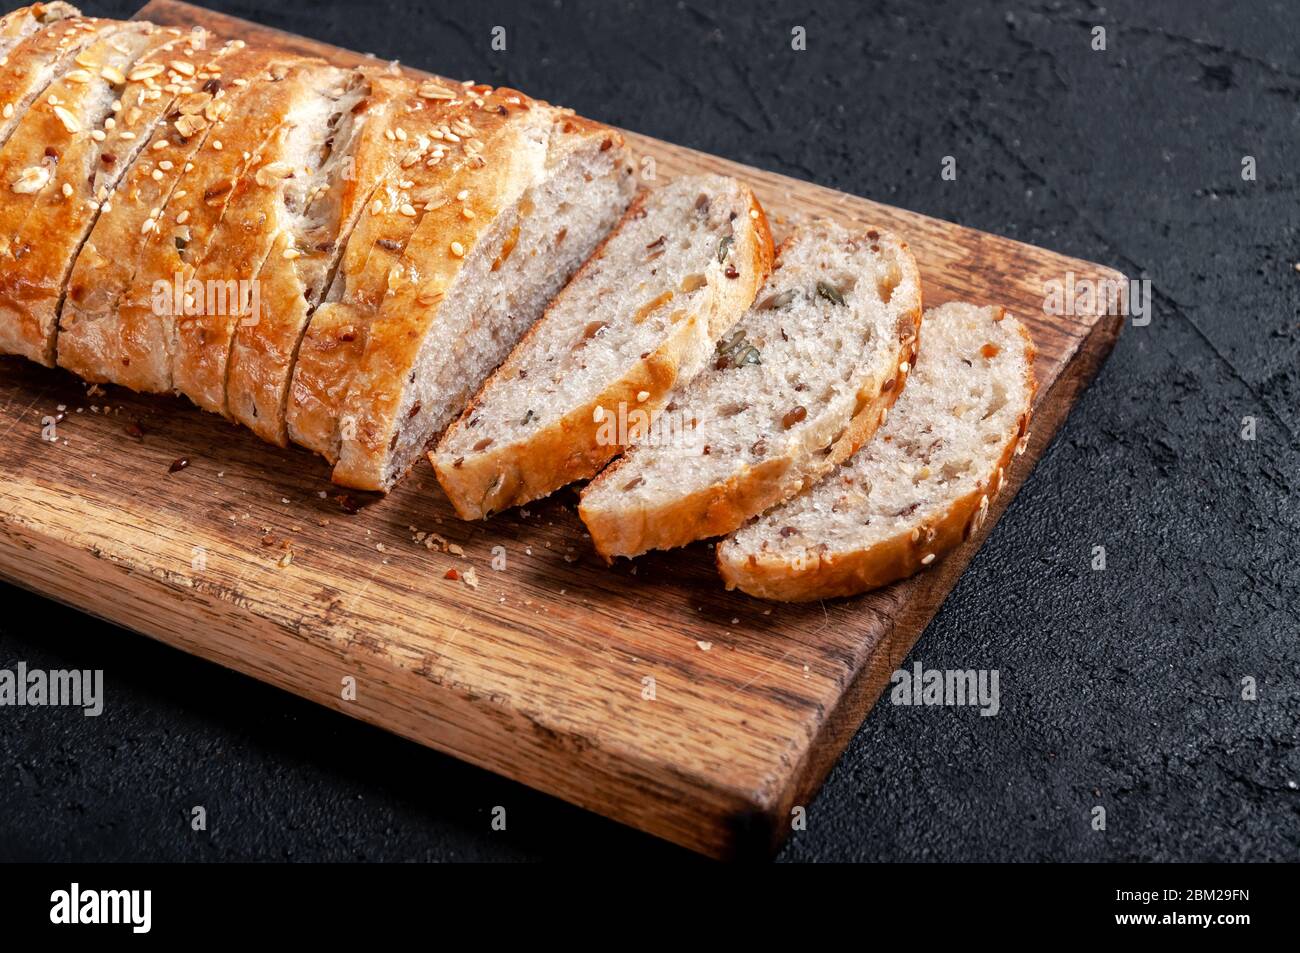 Homemade Sliced Wholemeal Multigrain Bread with Flax Seeds and Sesame on Wooden Board on Dark Table Stock Photo